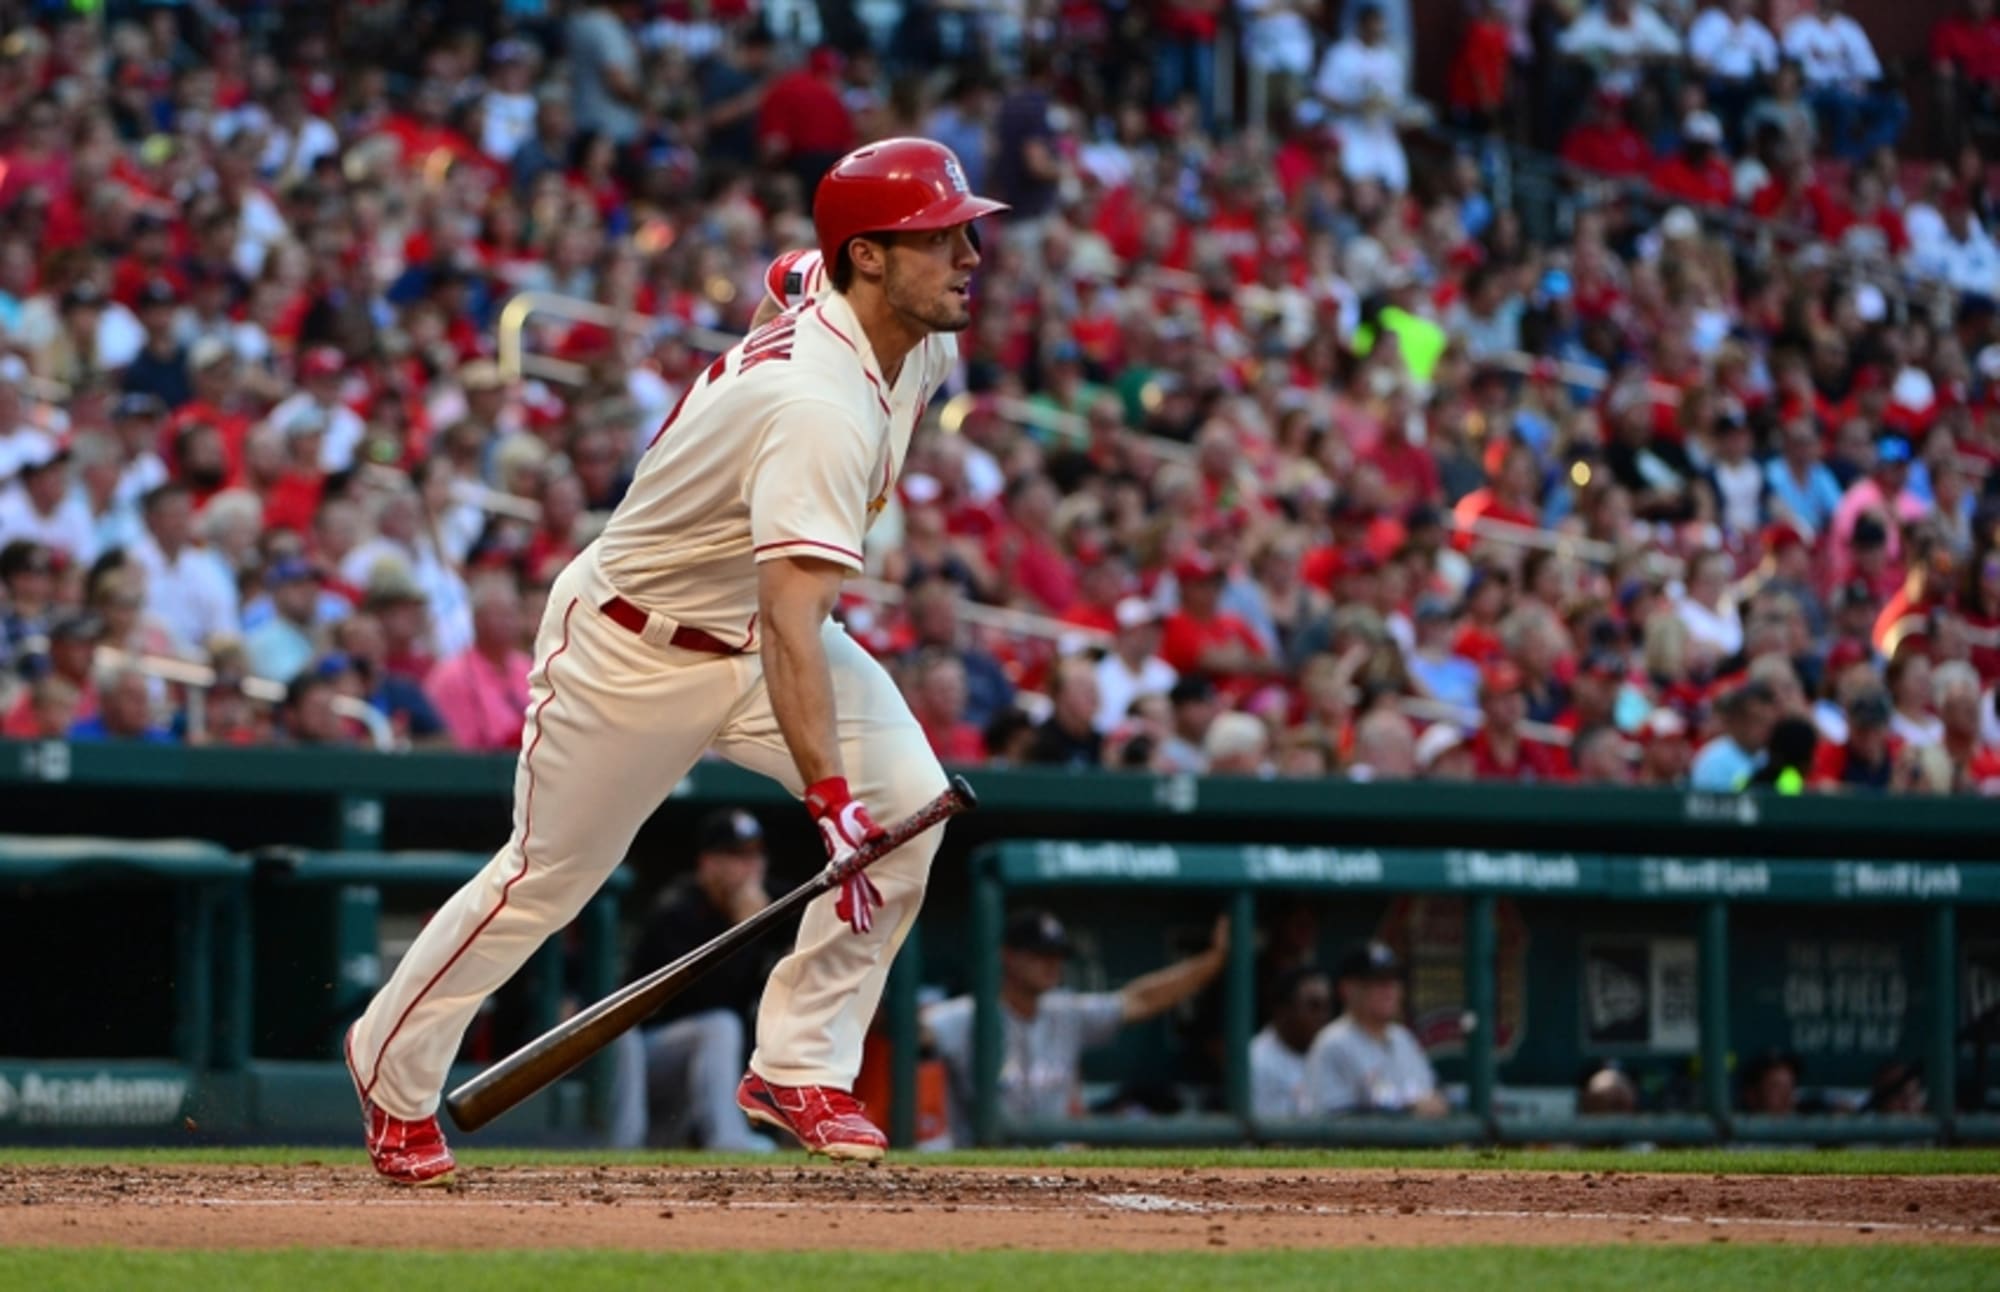 St. Louis Cardinals Demote Grichuk in Flurry of Roster Moves